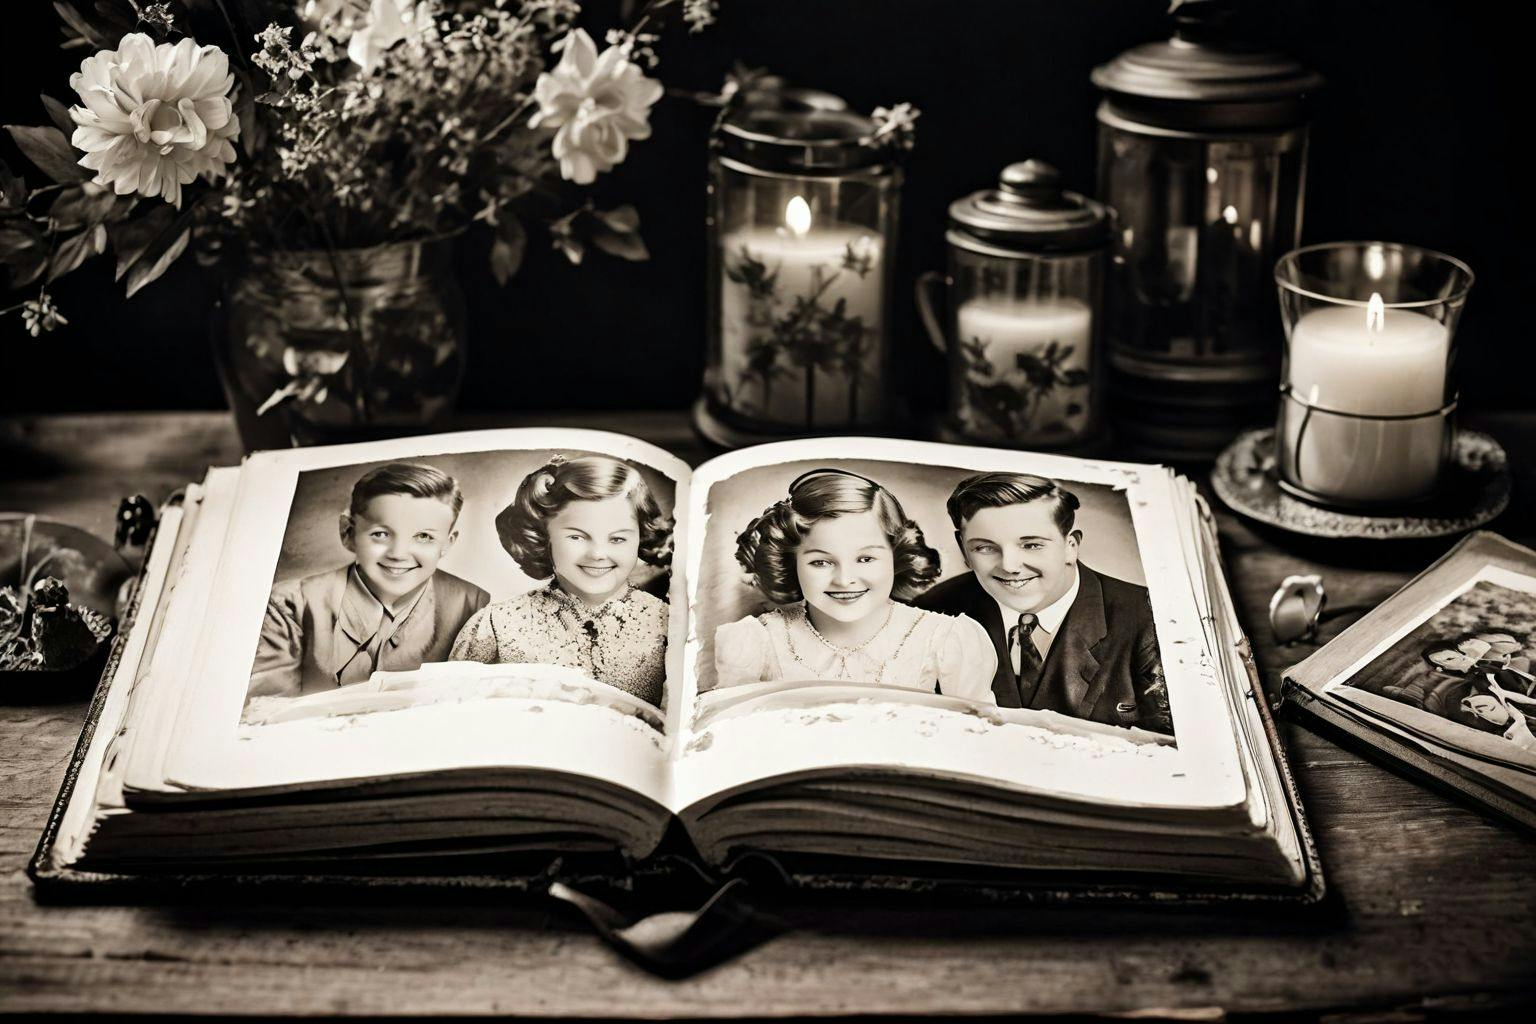 A vintage photo album open on a table with black and white family photos, symbolizing personal history and storytelling, Photographic, captured in natural light with a nostalgic atmosphere.